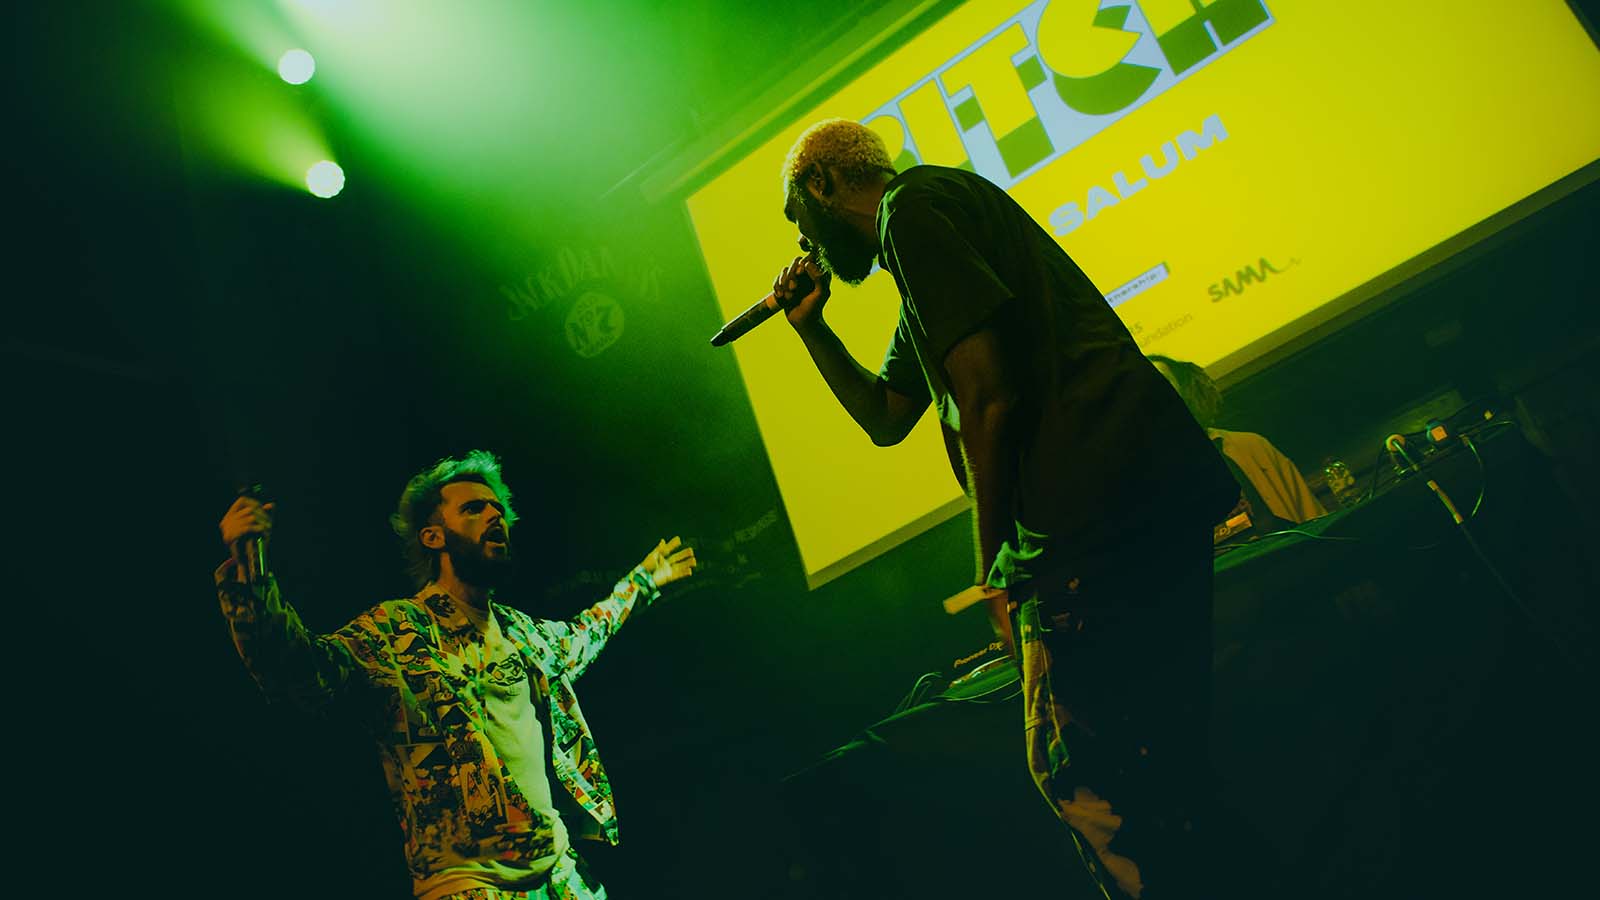 Two performers on stage during a Pitch Scotland gig - their logo is displayed at the back of the stage and moody green lighting fills the space